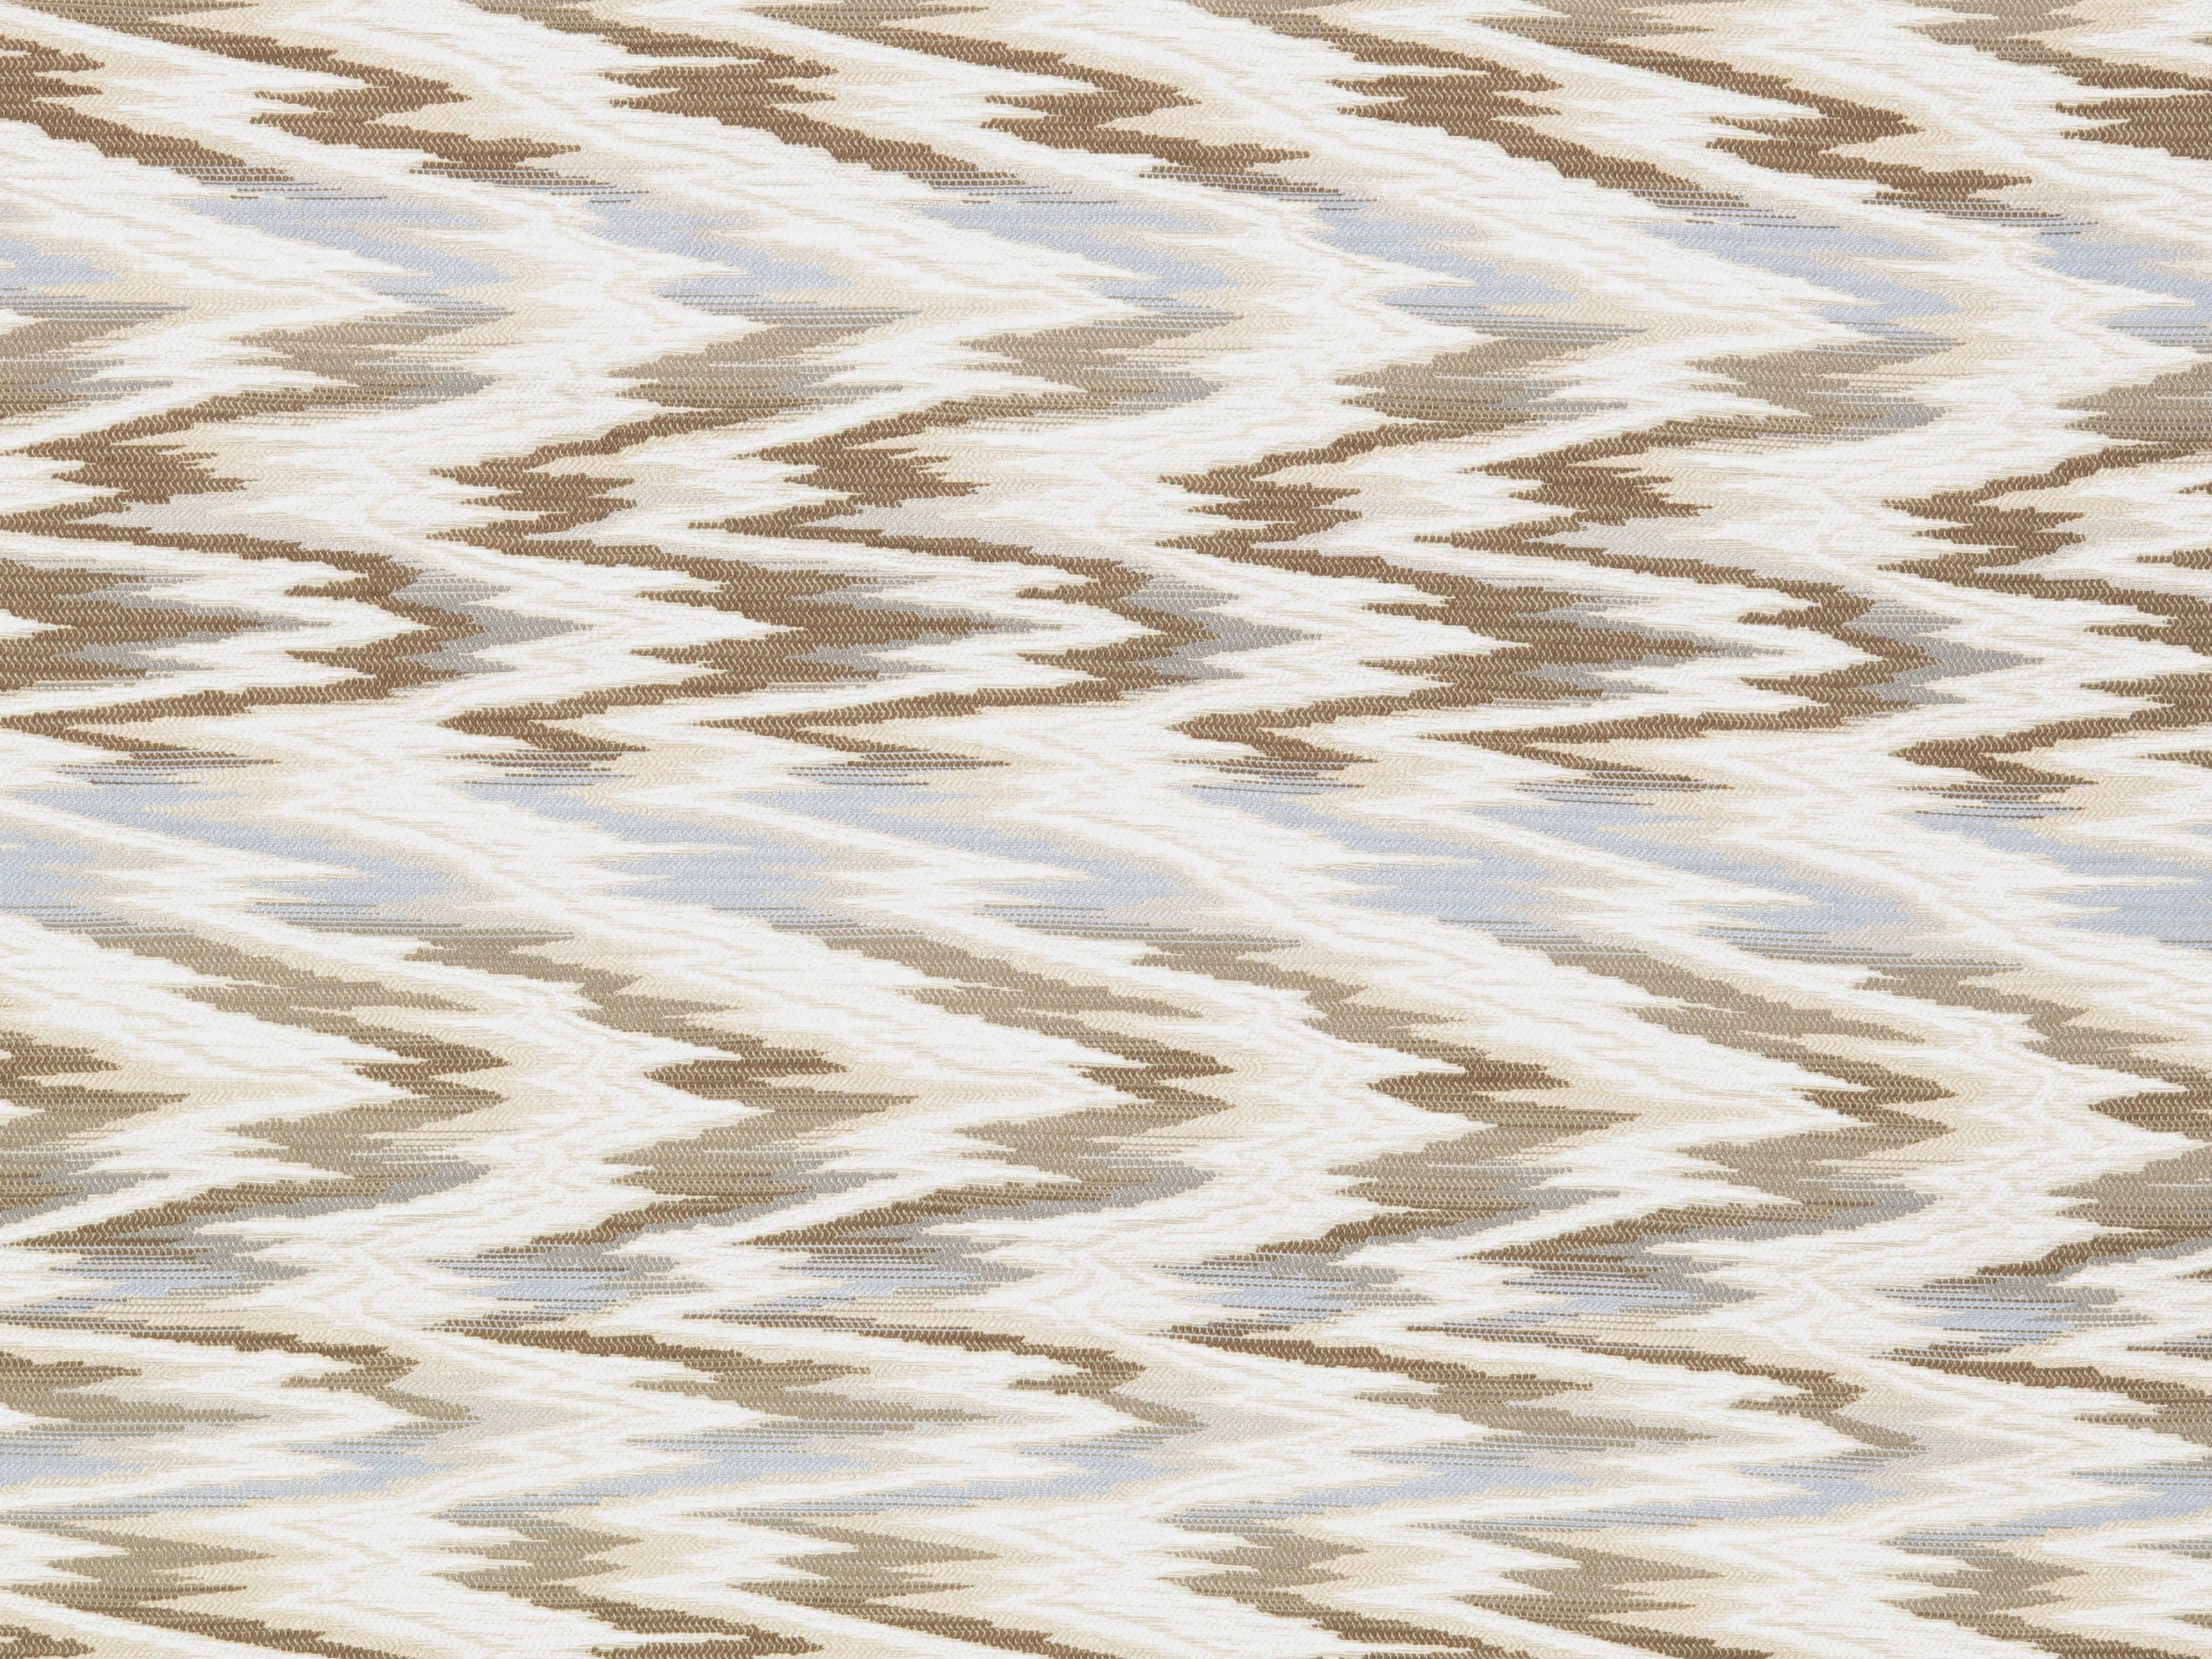 Nevis Peak fabric in driftwood color - pattern number M8 00042332 - by Scalamandre in the Old World Weavers collection